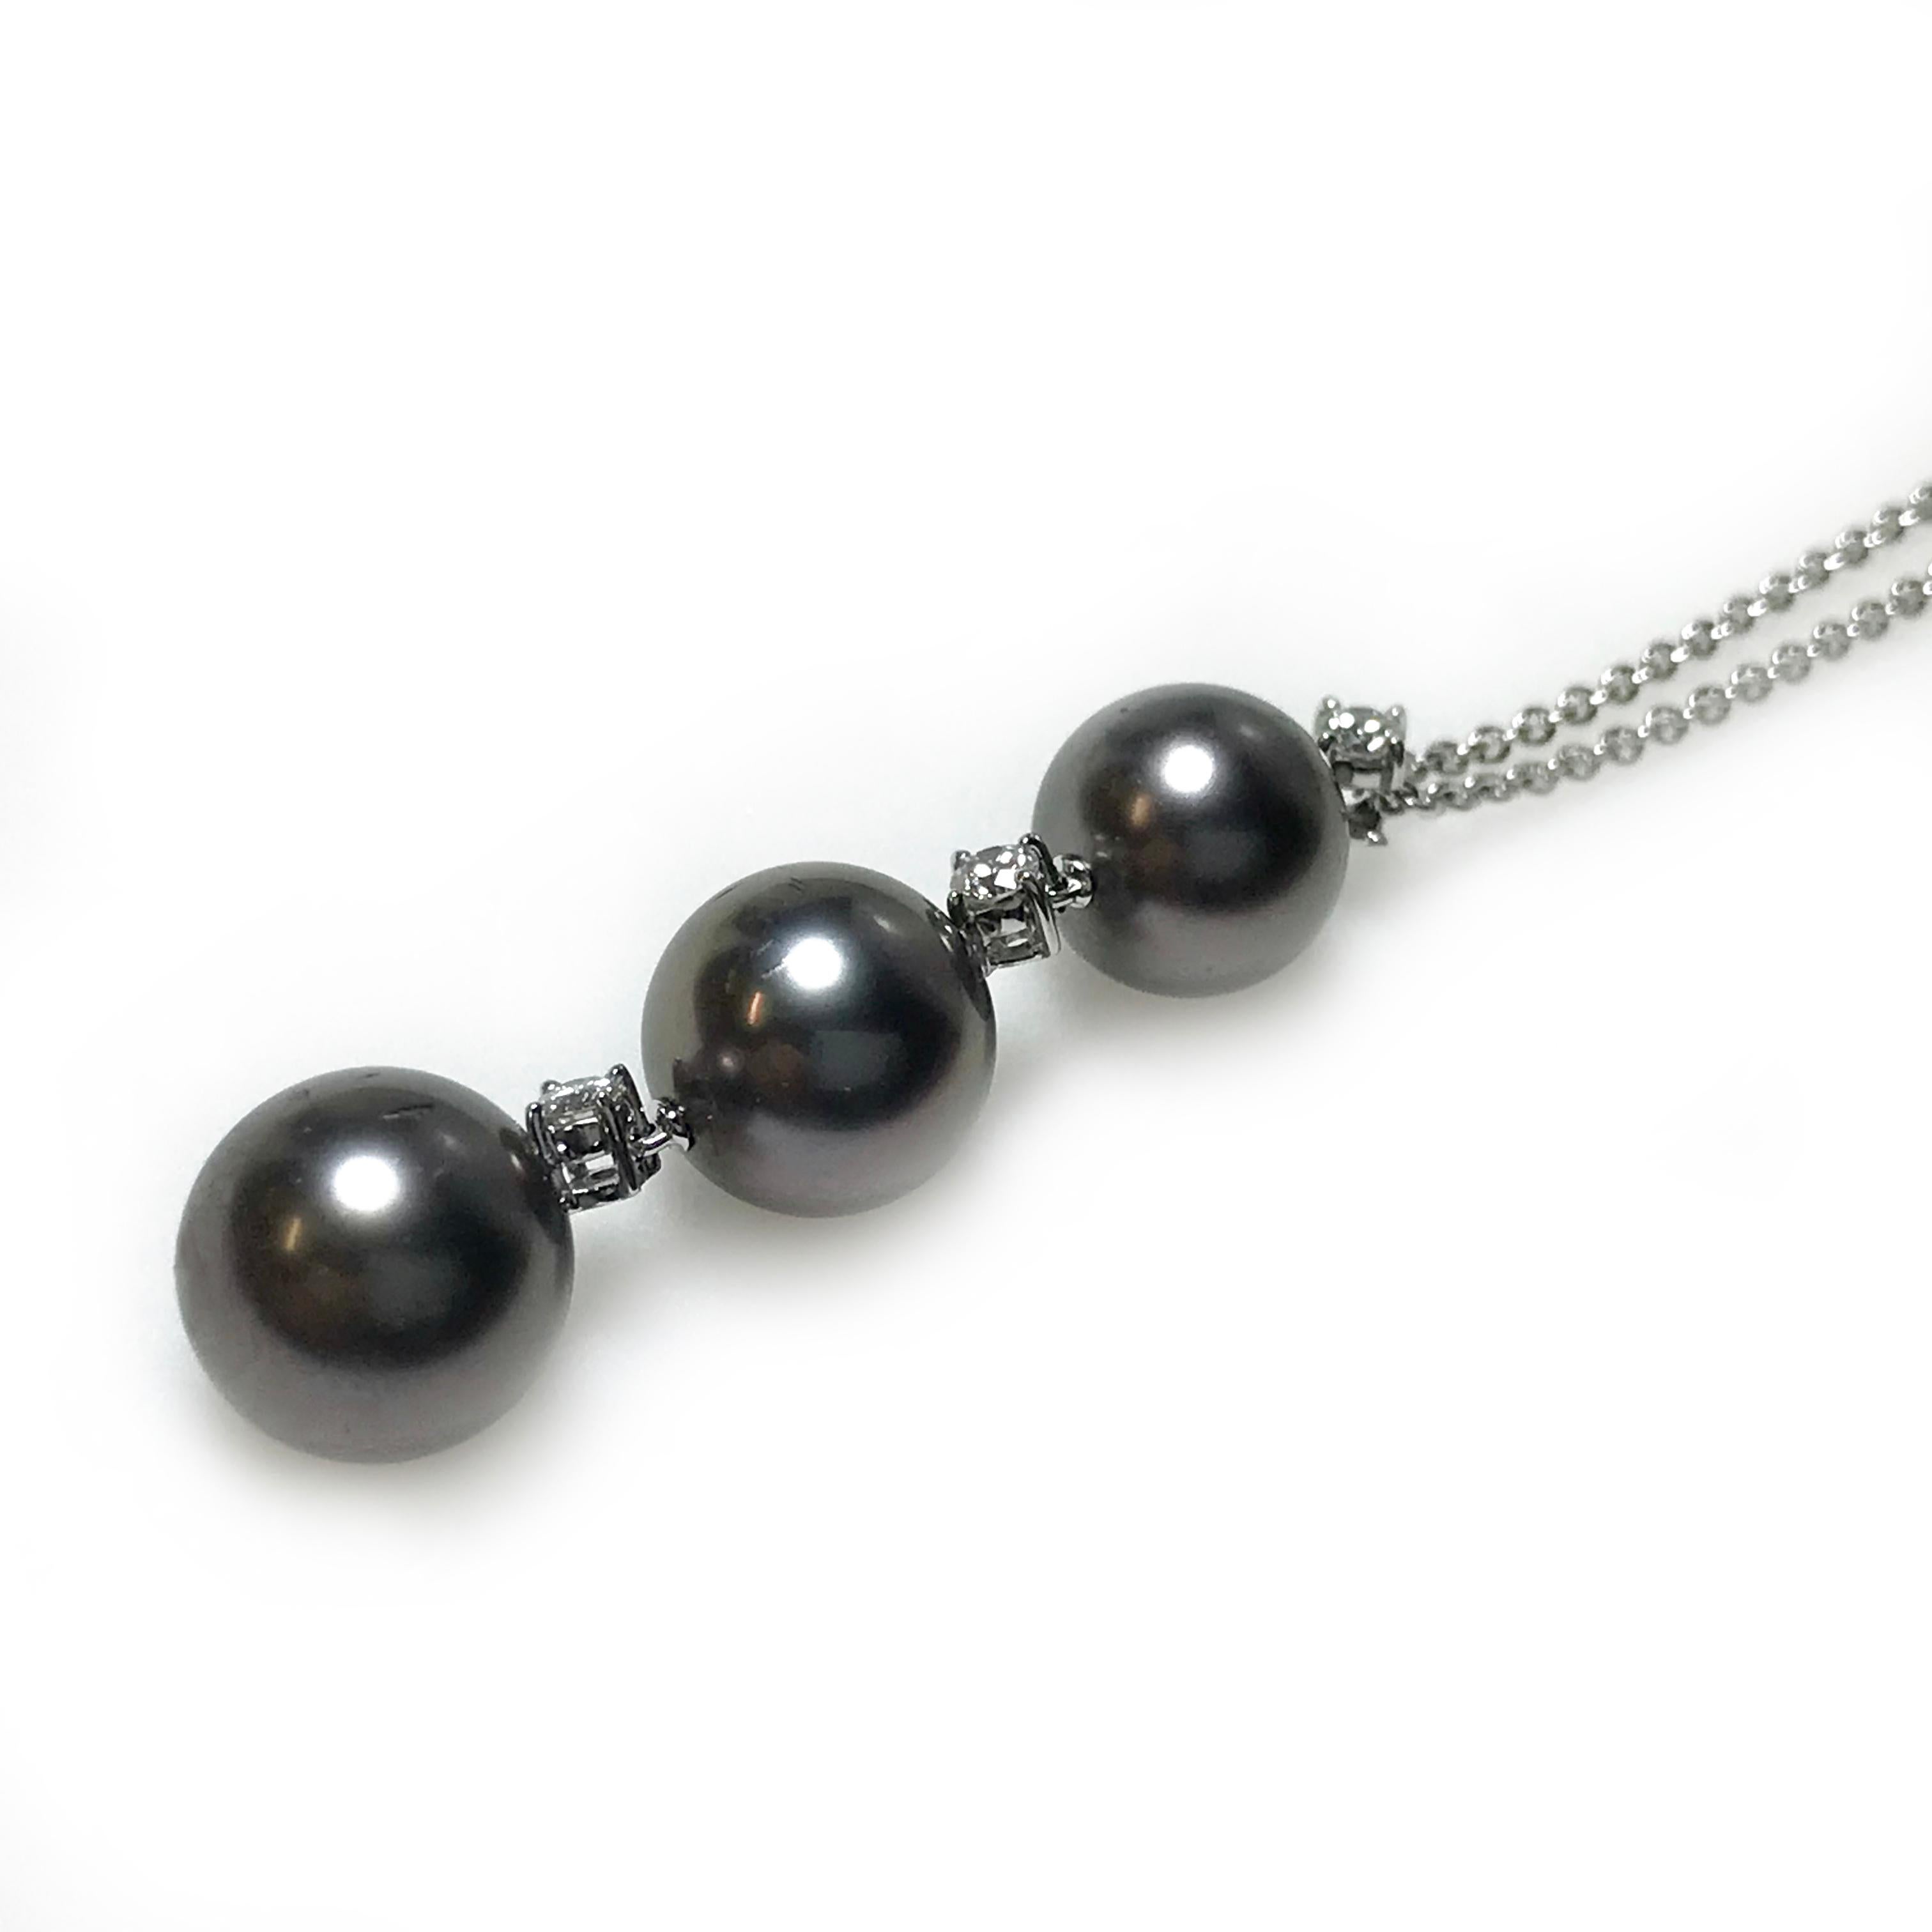 Gorgeous 18k white gold pendant/necklace with three alternating Akoya cultured black pearls and diamonds. The pearls range in size, 8mm, 8.5mm, and 9mm.  Known for their brilliant luster and rich color, Akoya pearls are a traditional symbol of